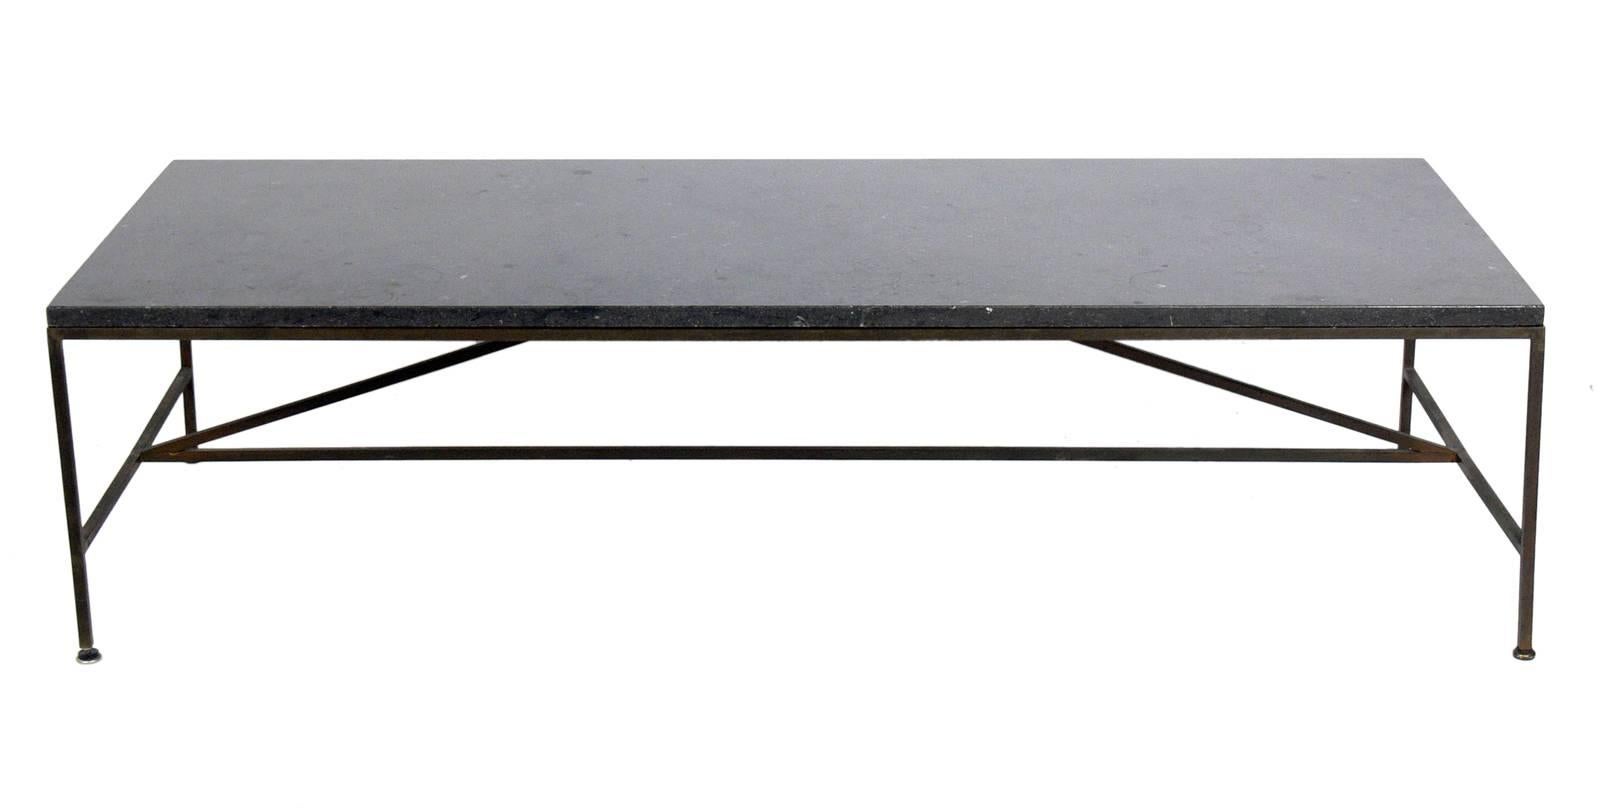 Marble-top coffee table designed by Paul McCobb for Calvin, American, circa 1950s. The marble top is a deep charcoal gray color, almost black, and the brass or brass plated metal base retains it's warm original patina.